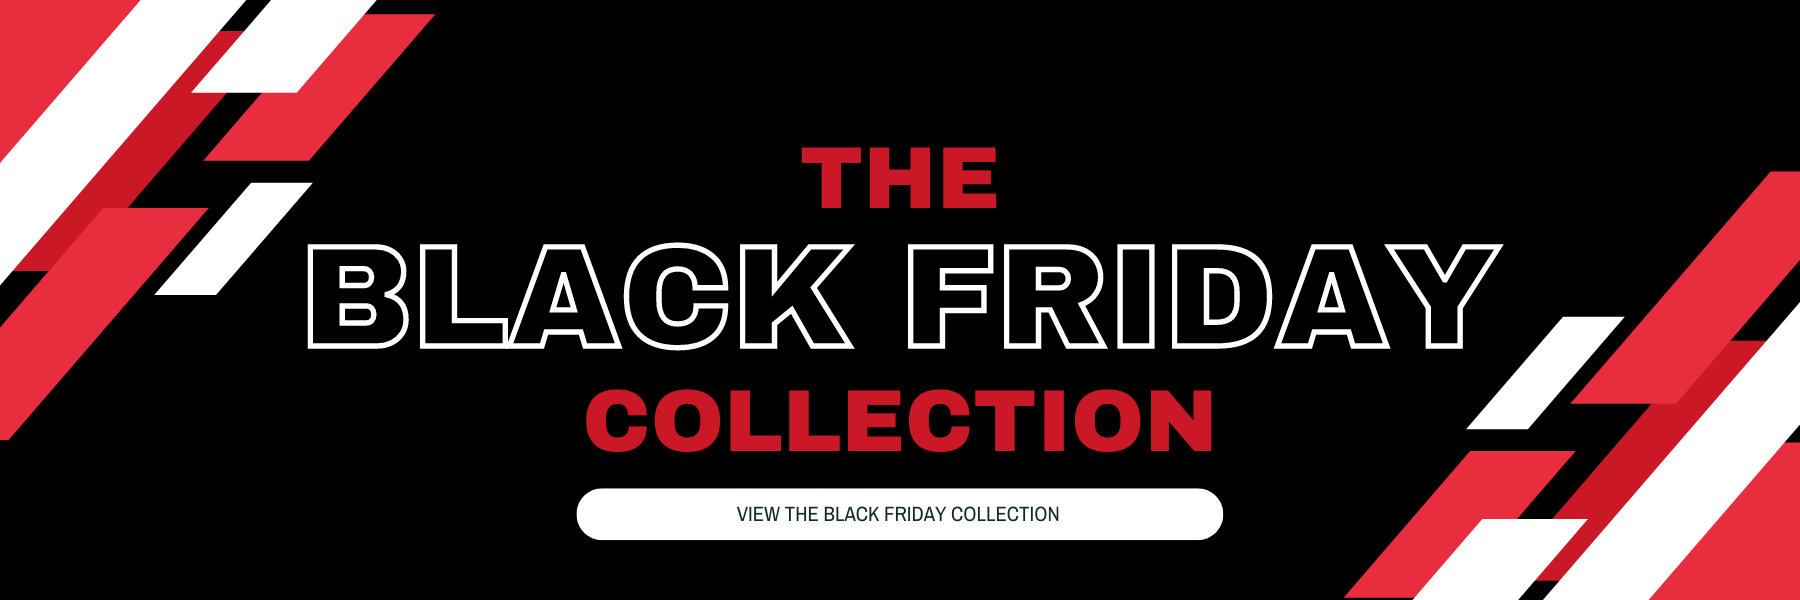 The Black Friday Collection